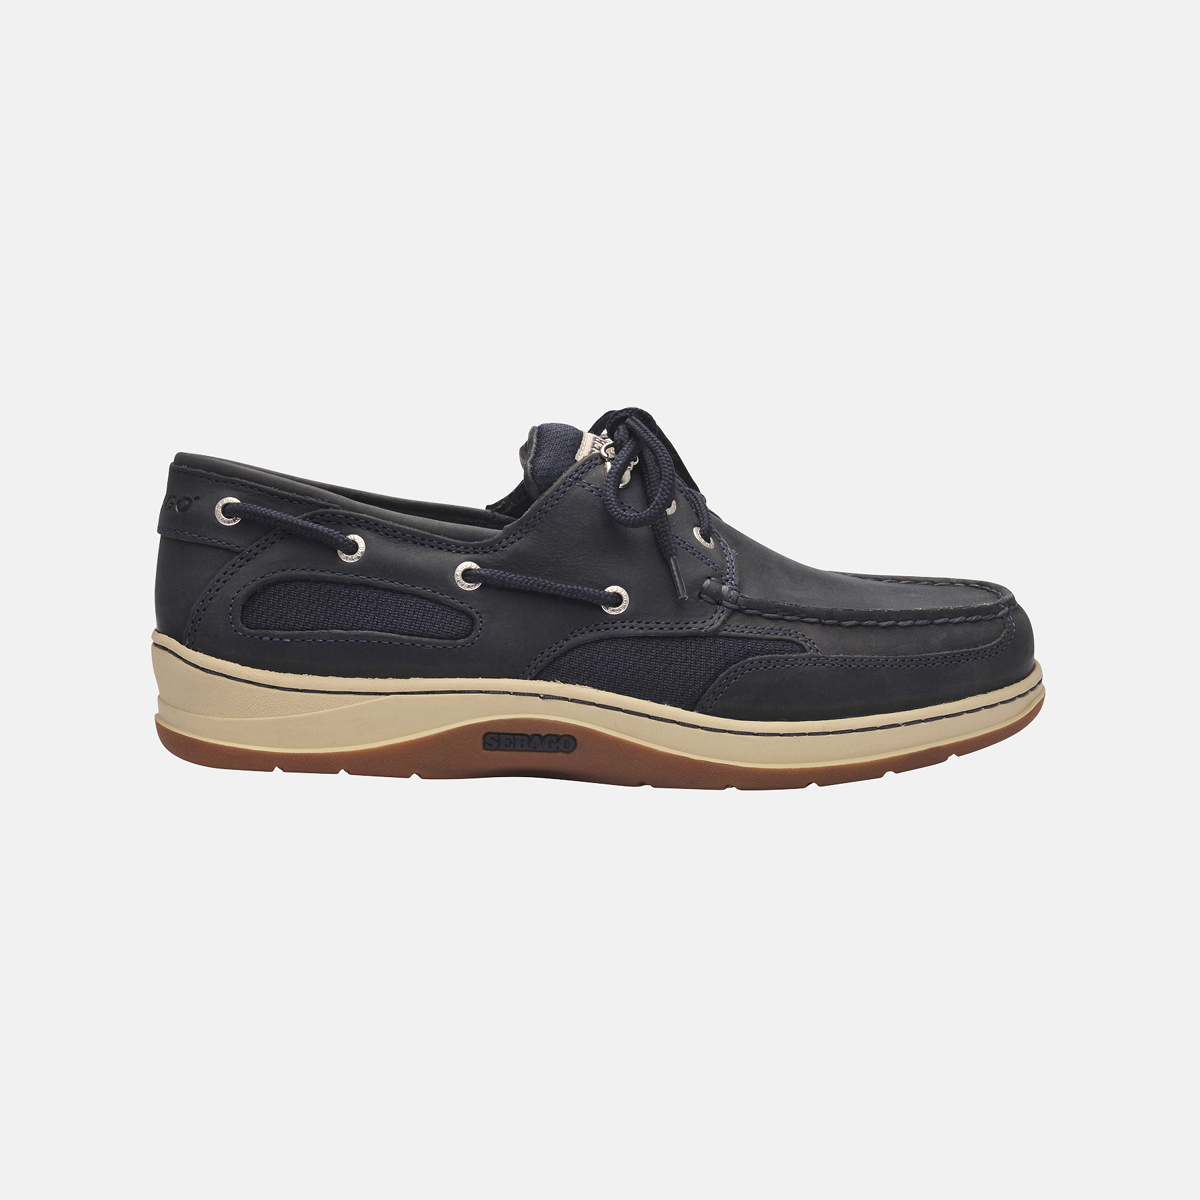 Sebago Clovehitch II chaussures bateau homme blue navy leather, taille 45 (US 11)